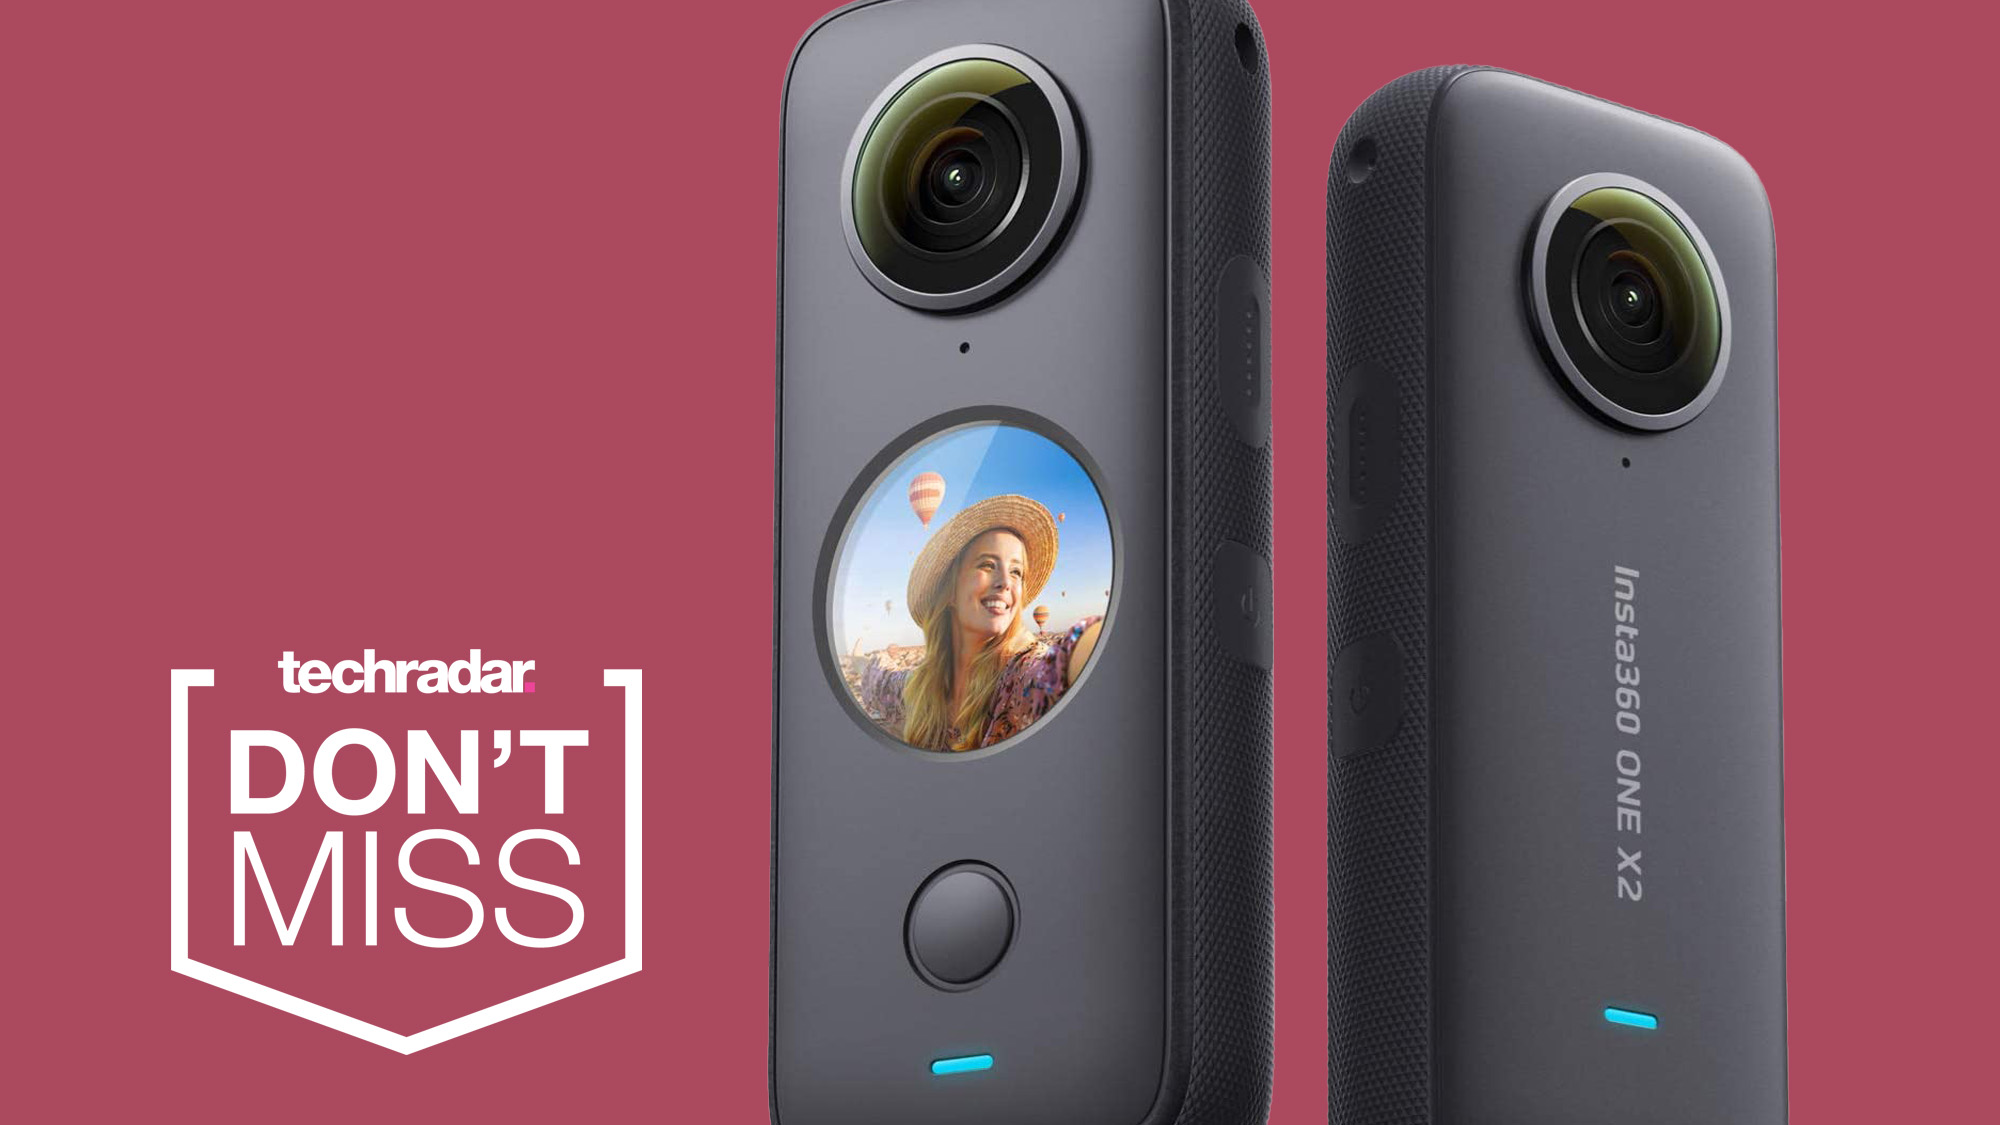 Insta360 One X2 review: The most fun camera 